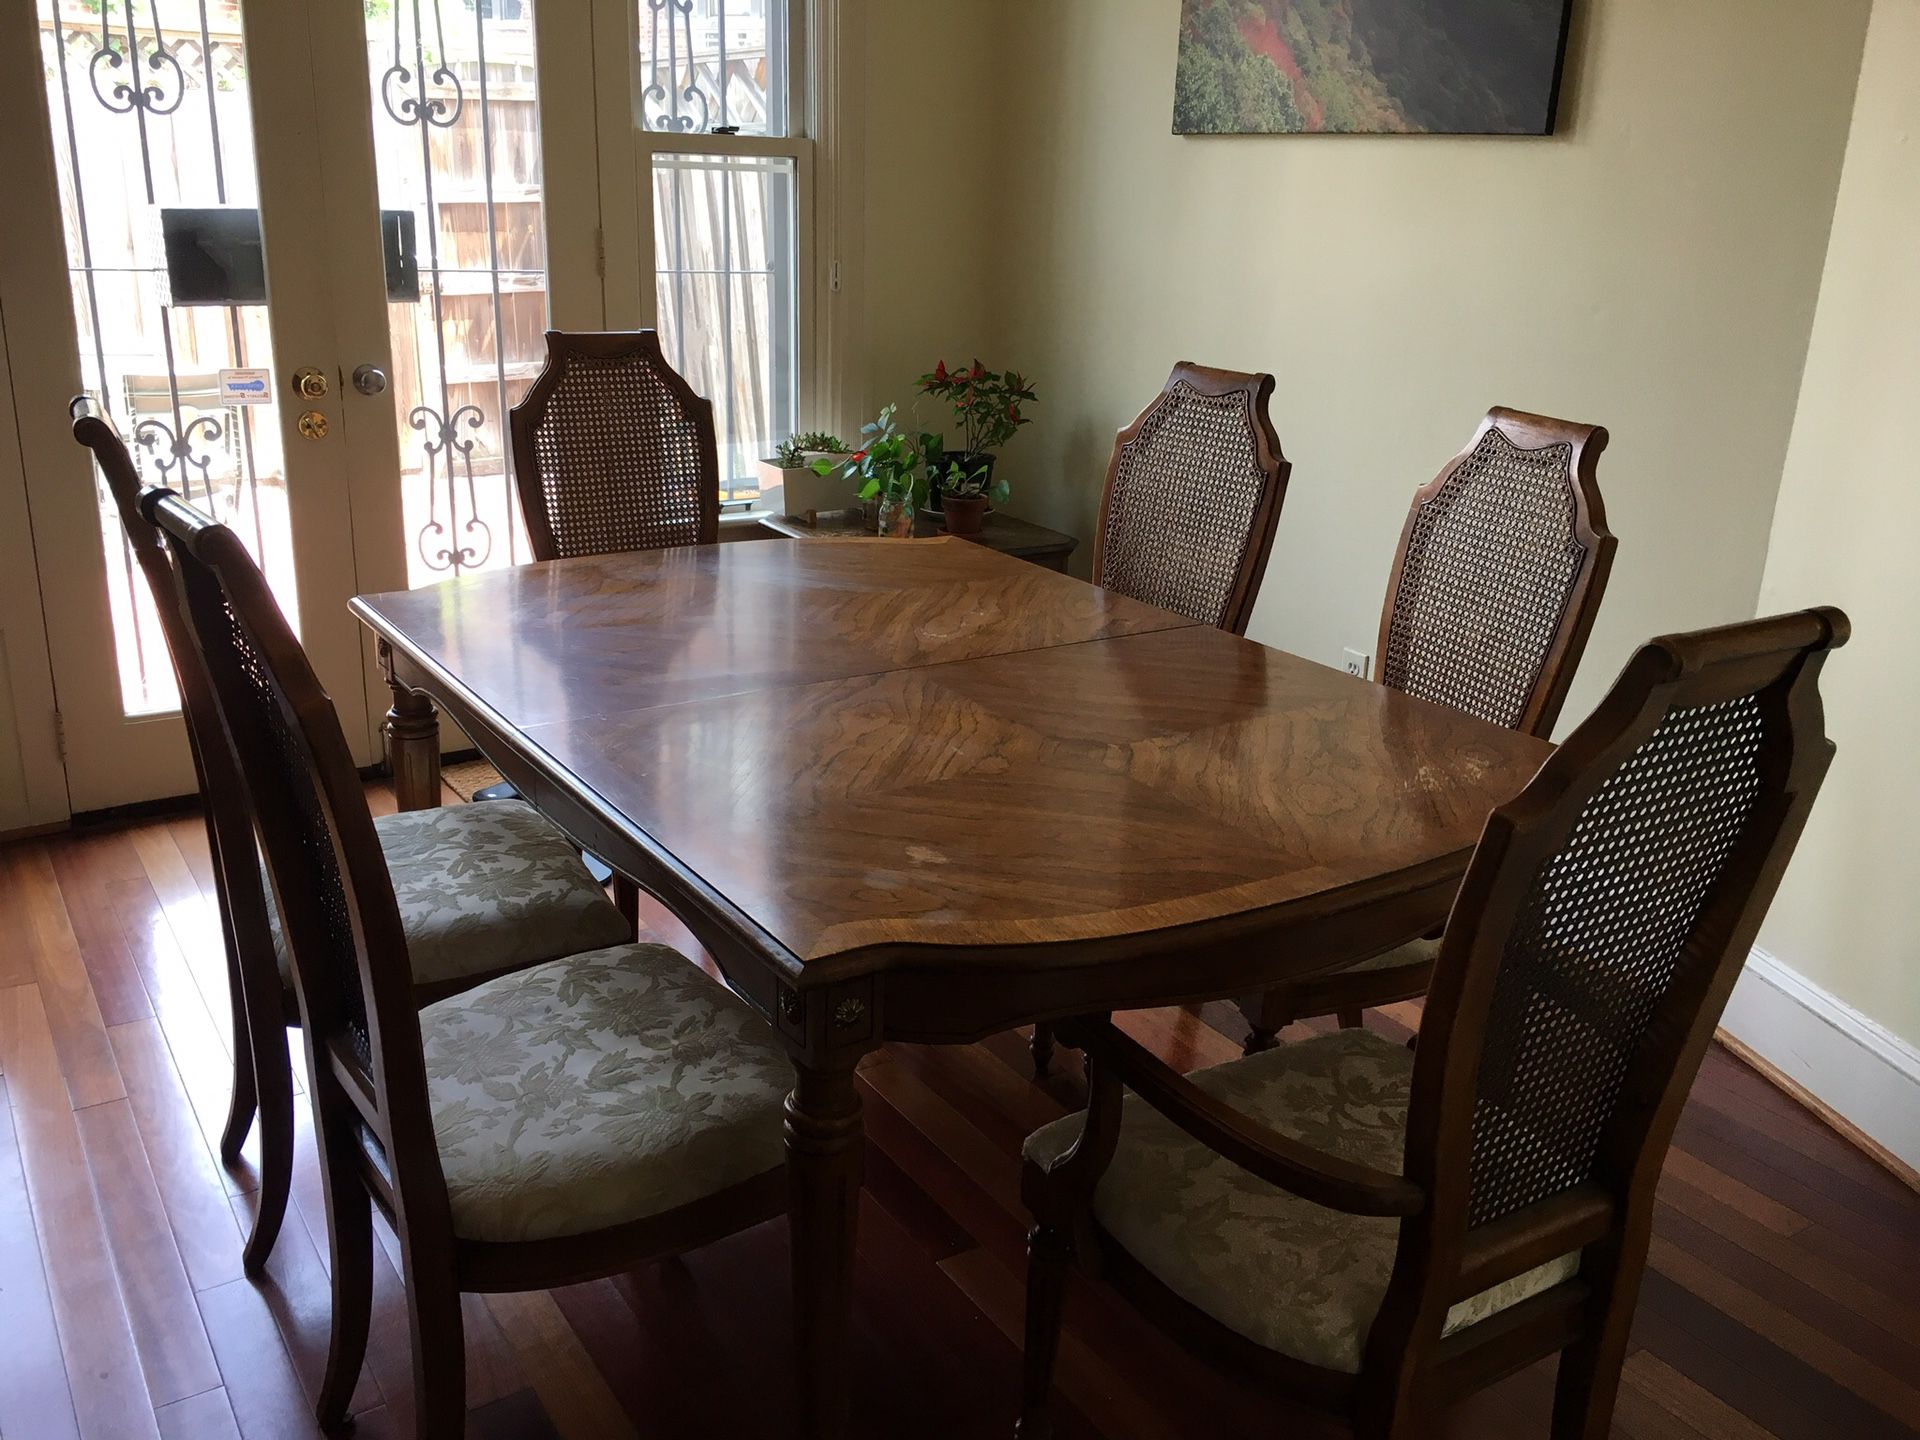 A dining table with 6 chairs